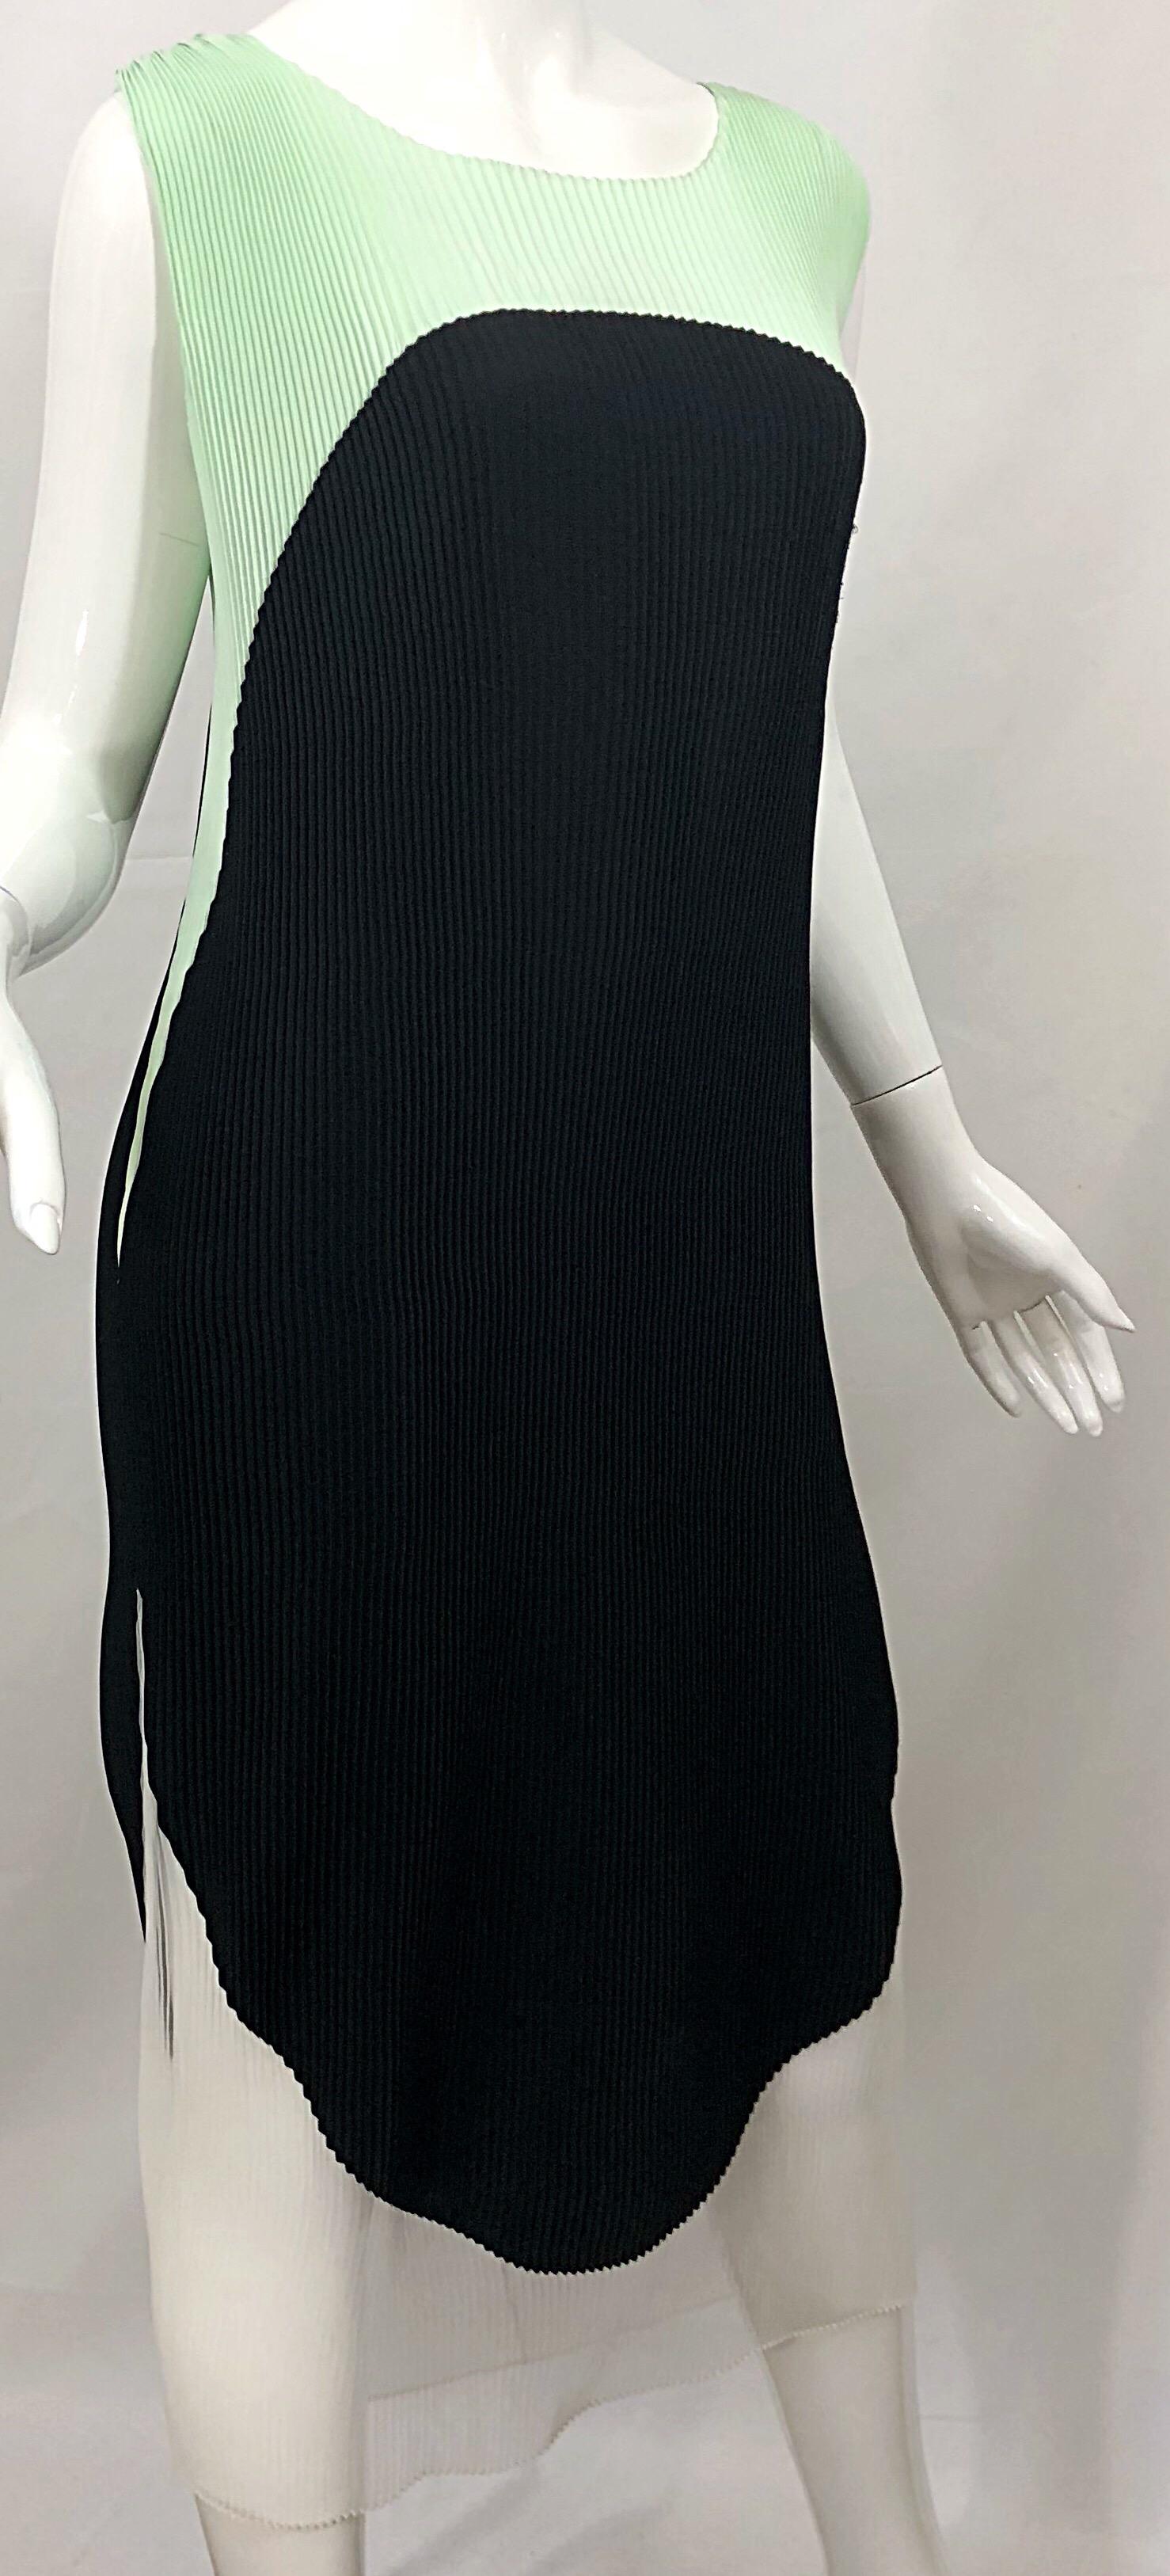 Stella McCartney Spring 2013 Runway Size 44 US 8 - 10 Color Block Pleated Dress In Excellent Condition For Sale In San Diego, CA